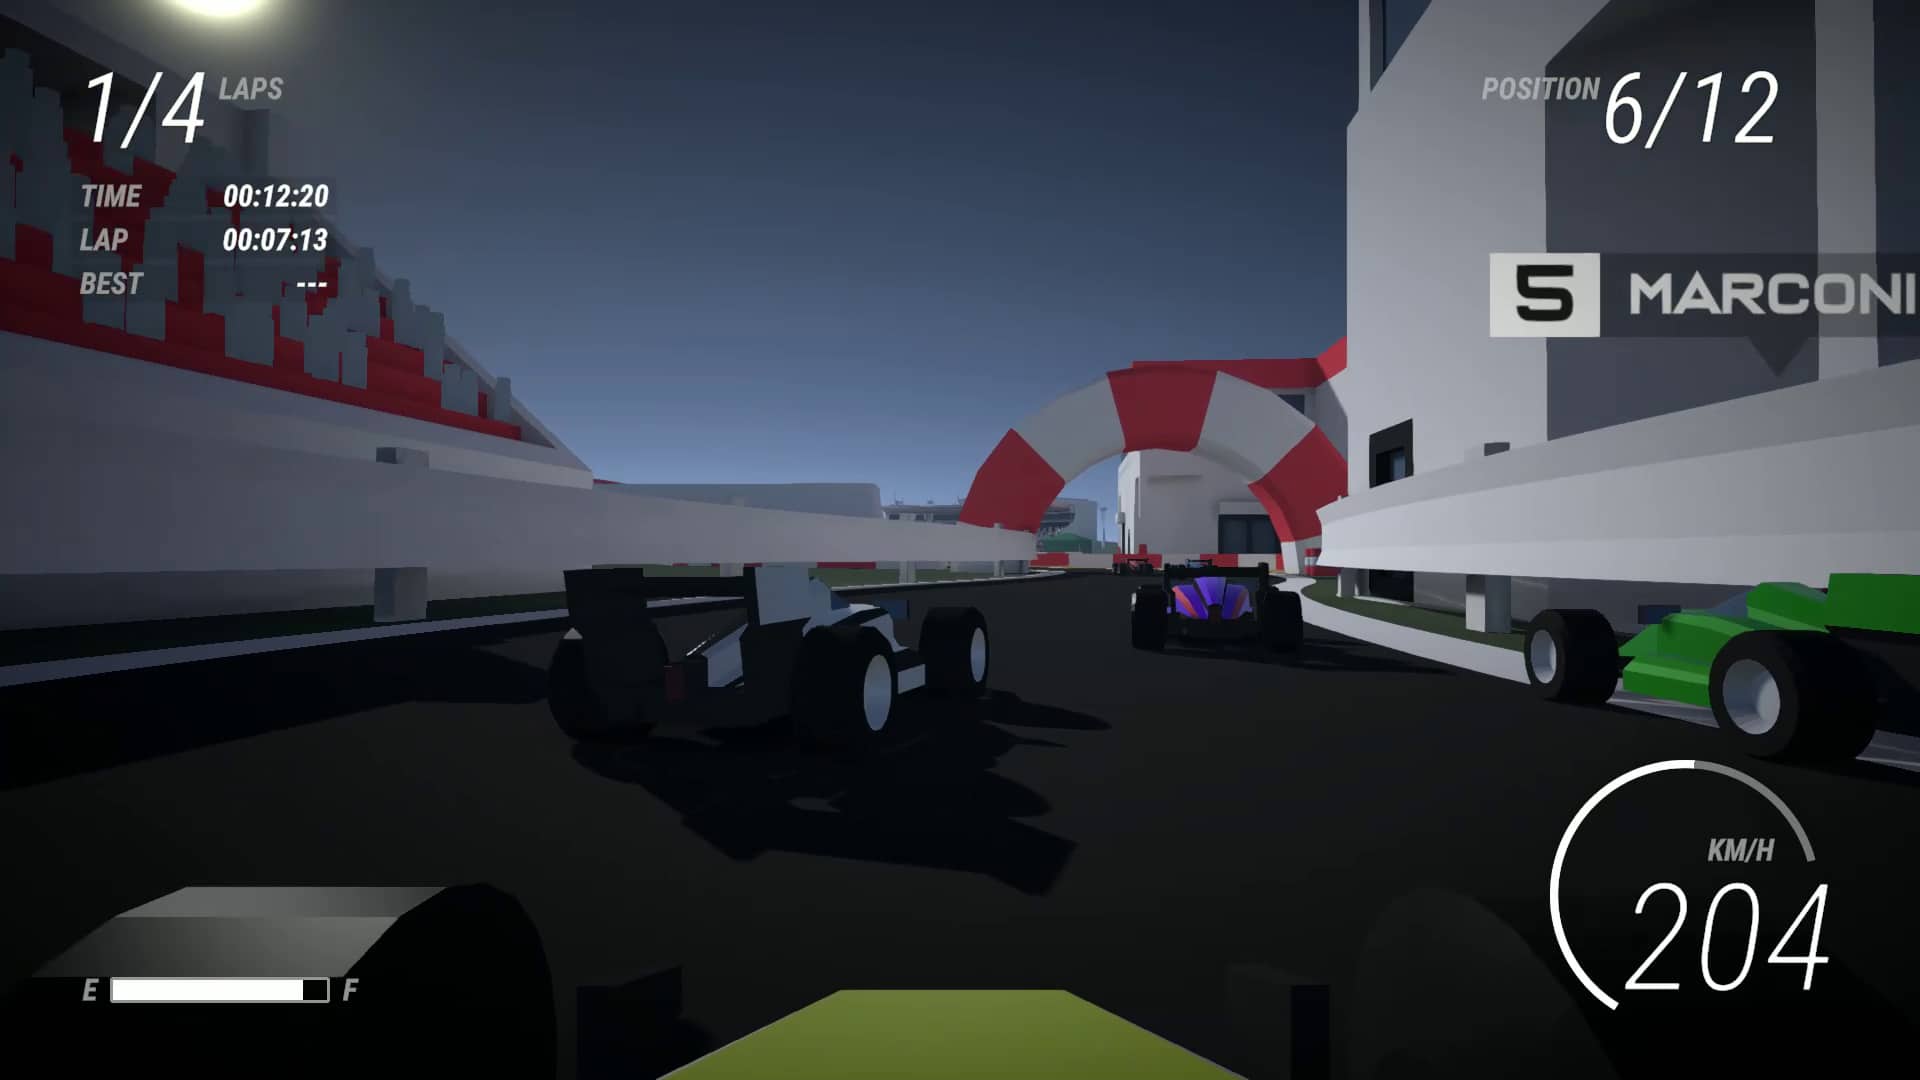 Hands-on with Race Condition, a low poly arcade blast